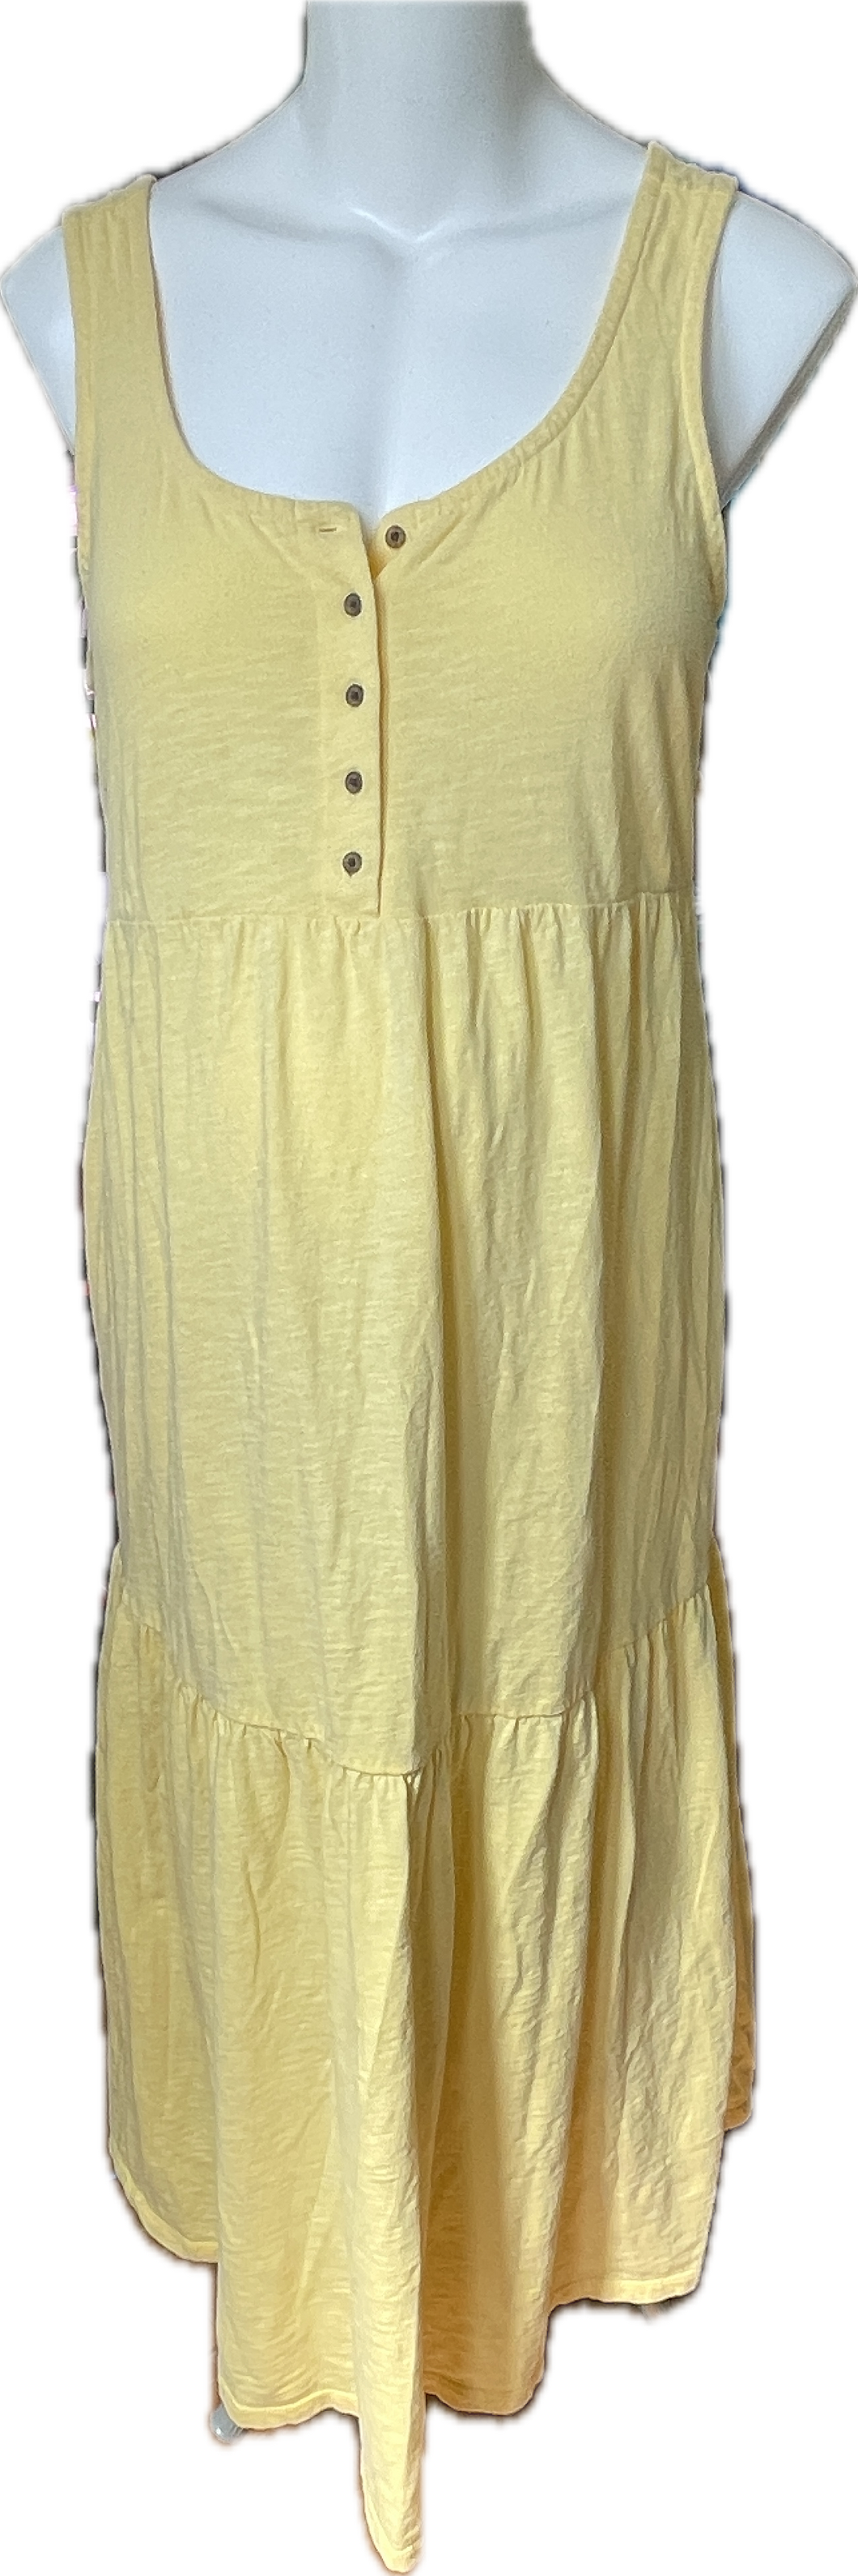 L Old Navy Maternity Maxi Dress in Yellow